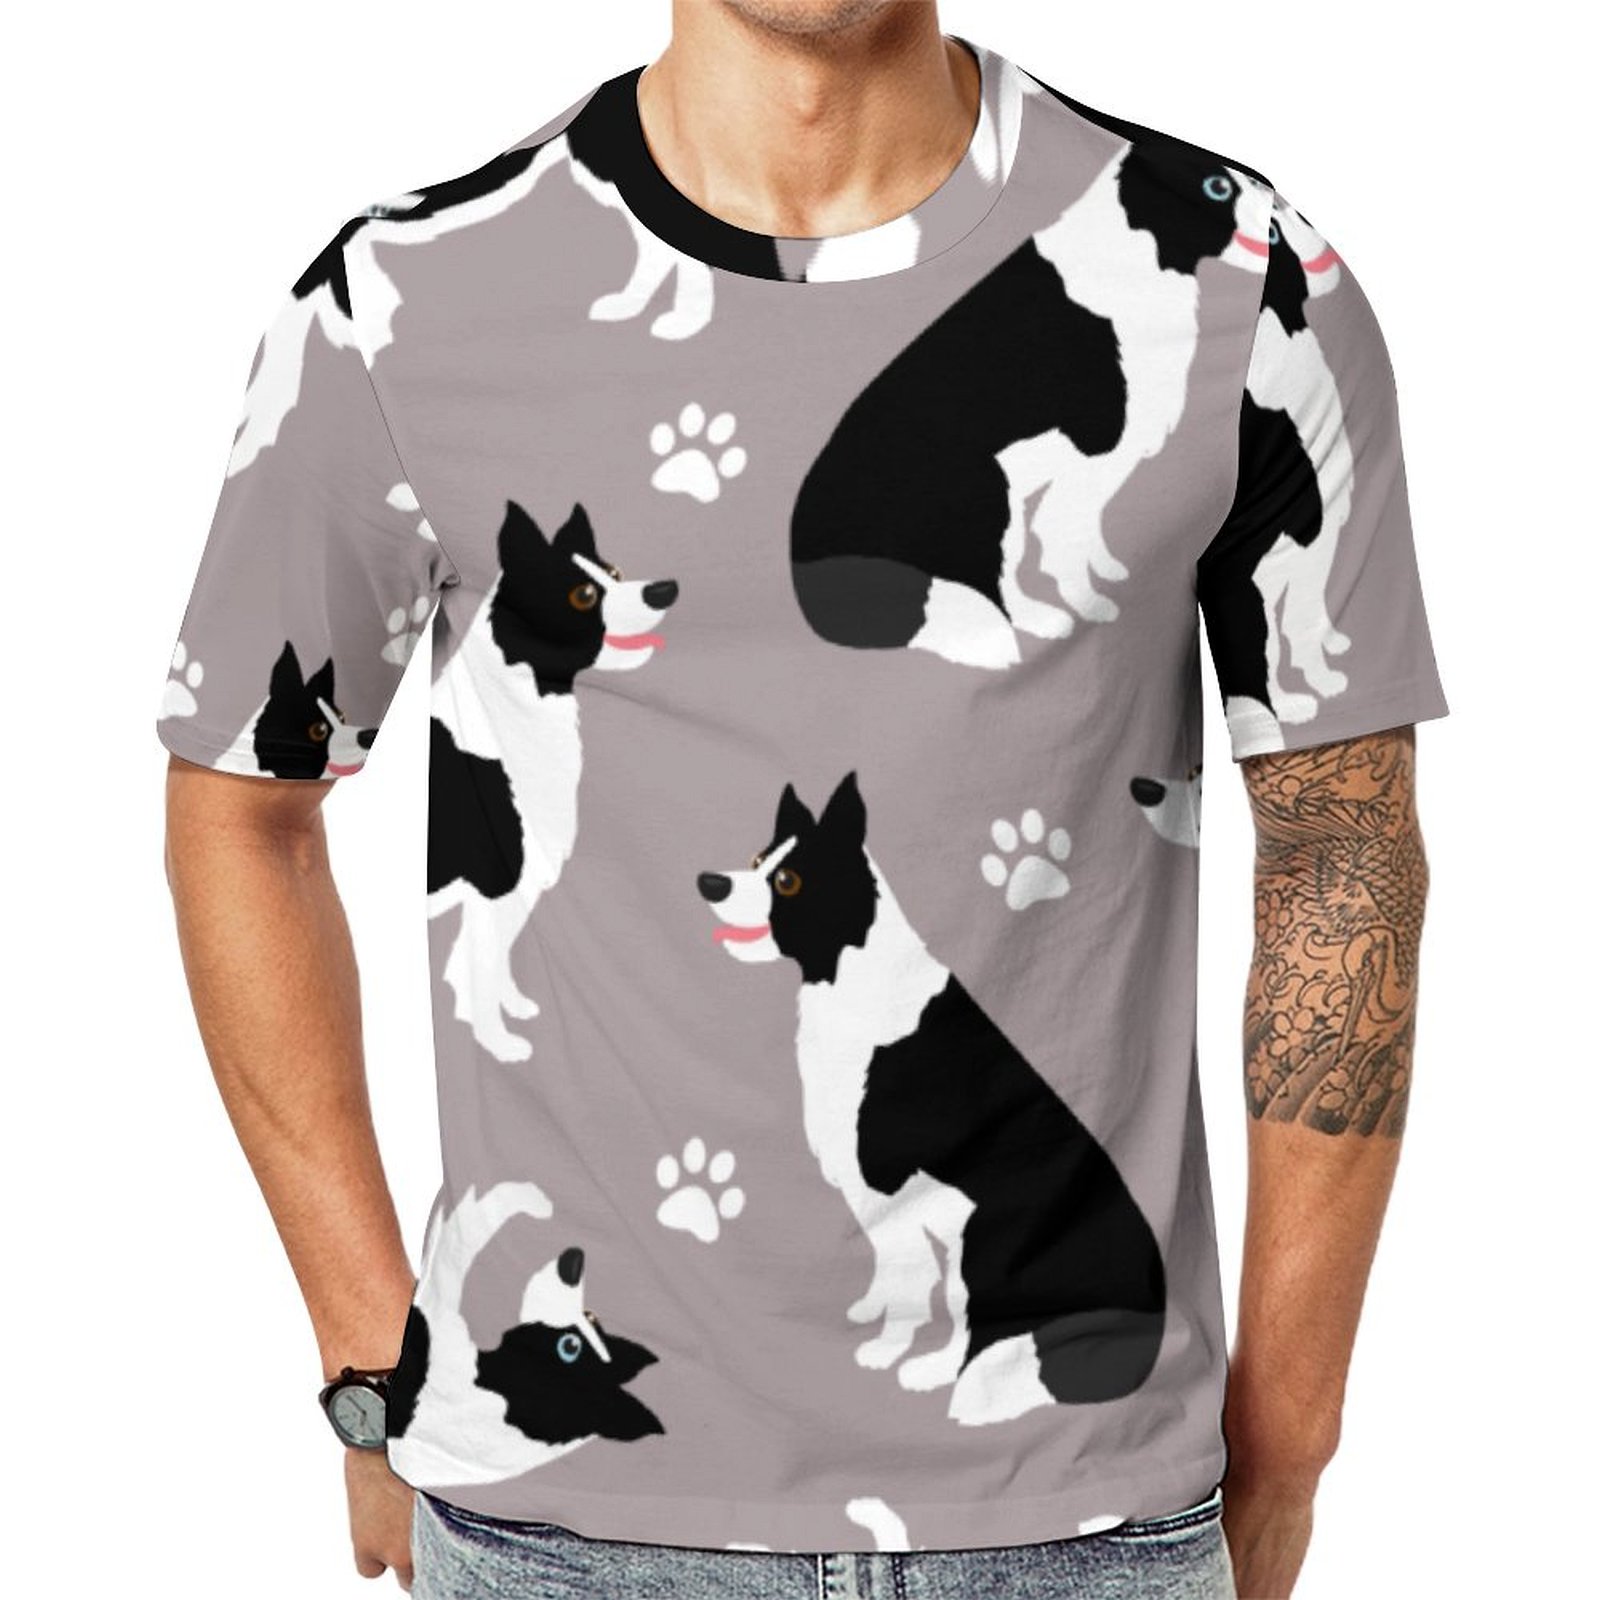 Border Collie And Paw Print Socks Short Sleeve Print Unisex Tshirt Summer Casual Tees for Men and Women Coolcoshirts